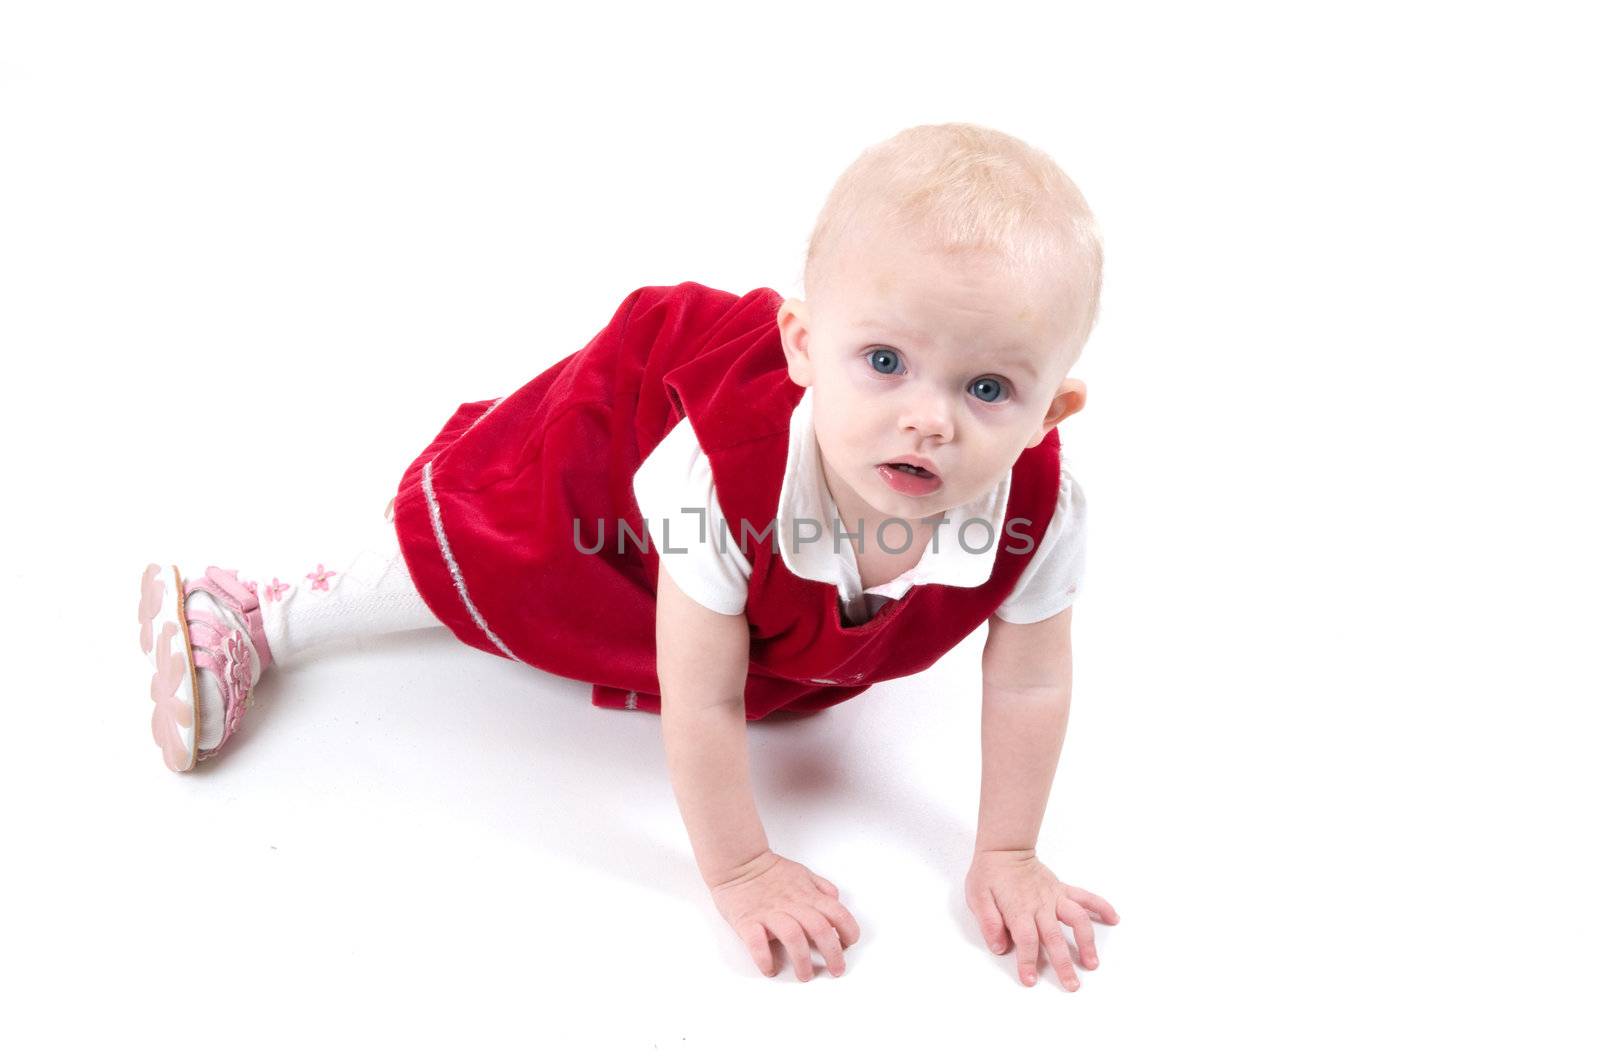 Baby in red is sitting on the floor